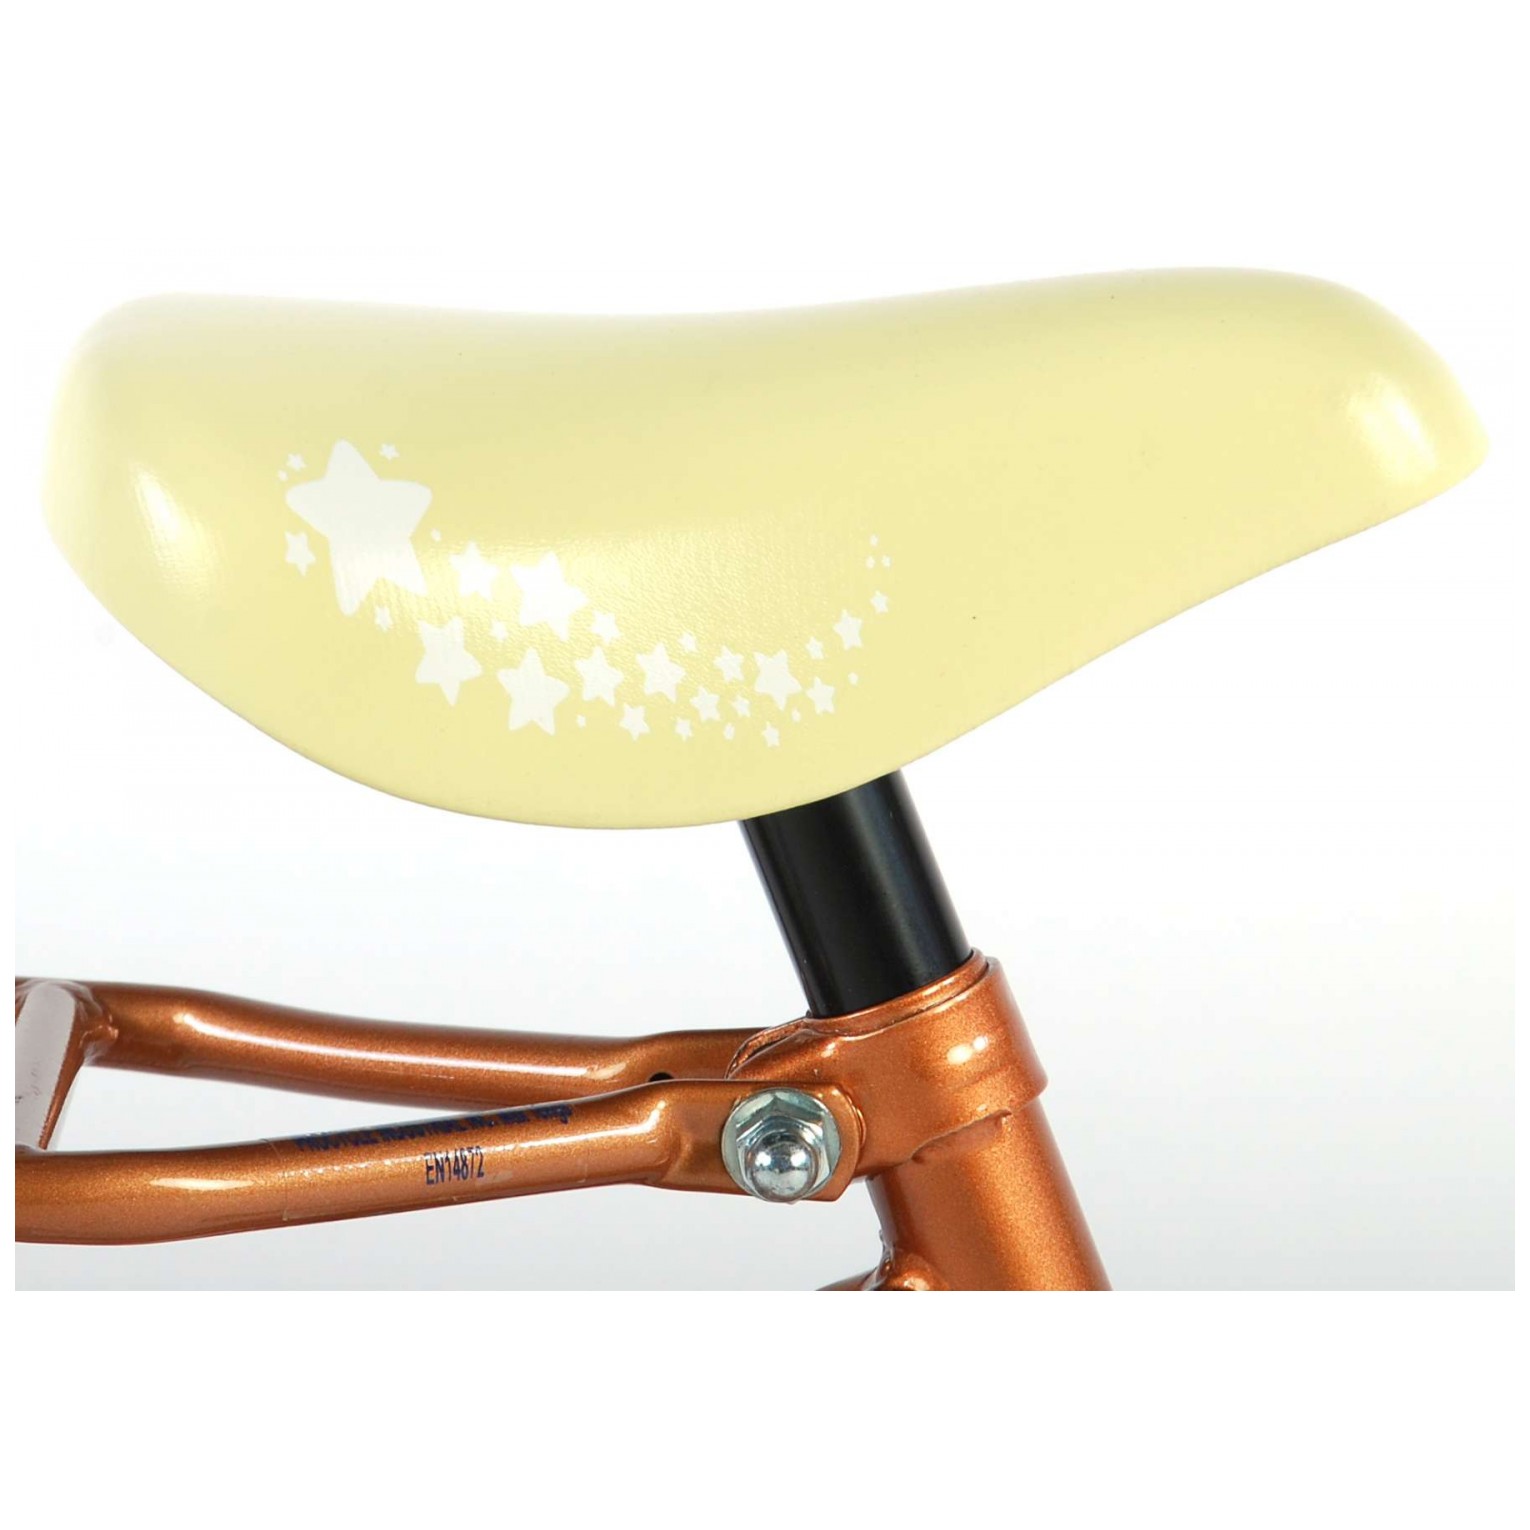 Volare Lovely Stars Fiets - 14 inch - Goud